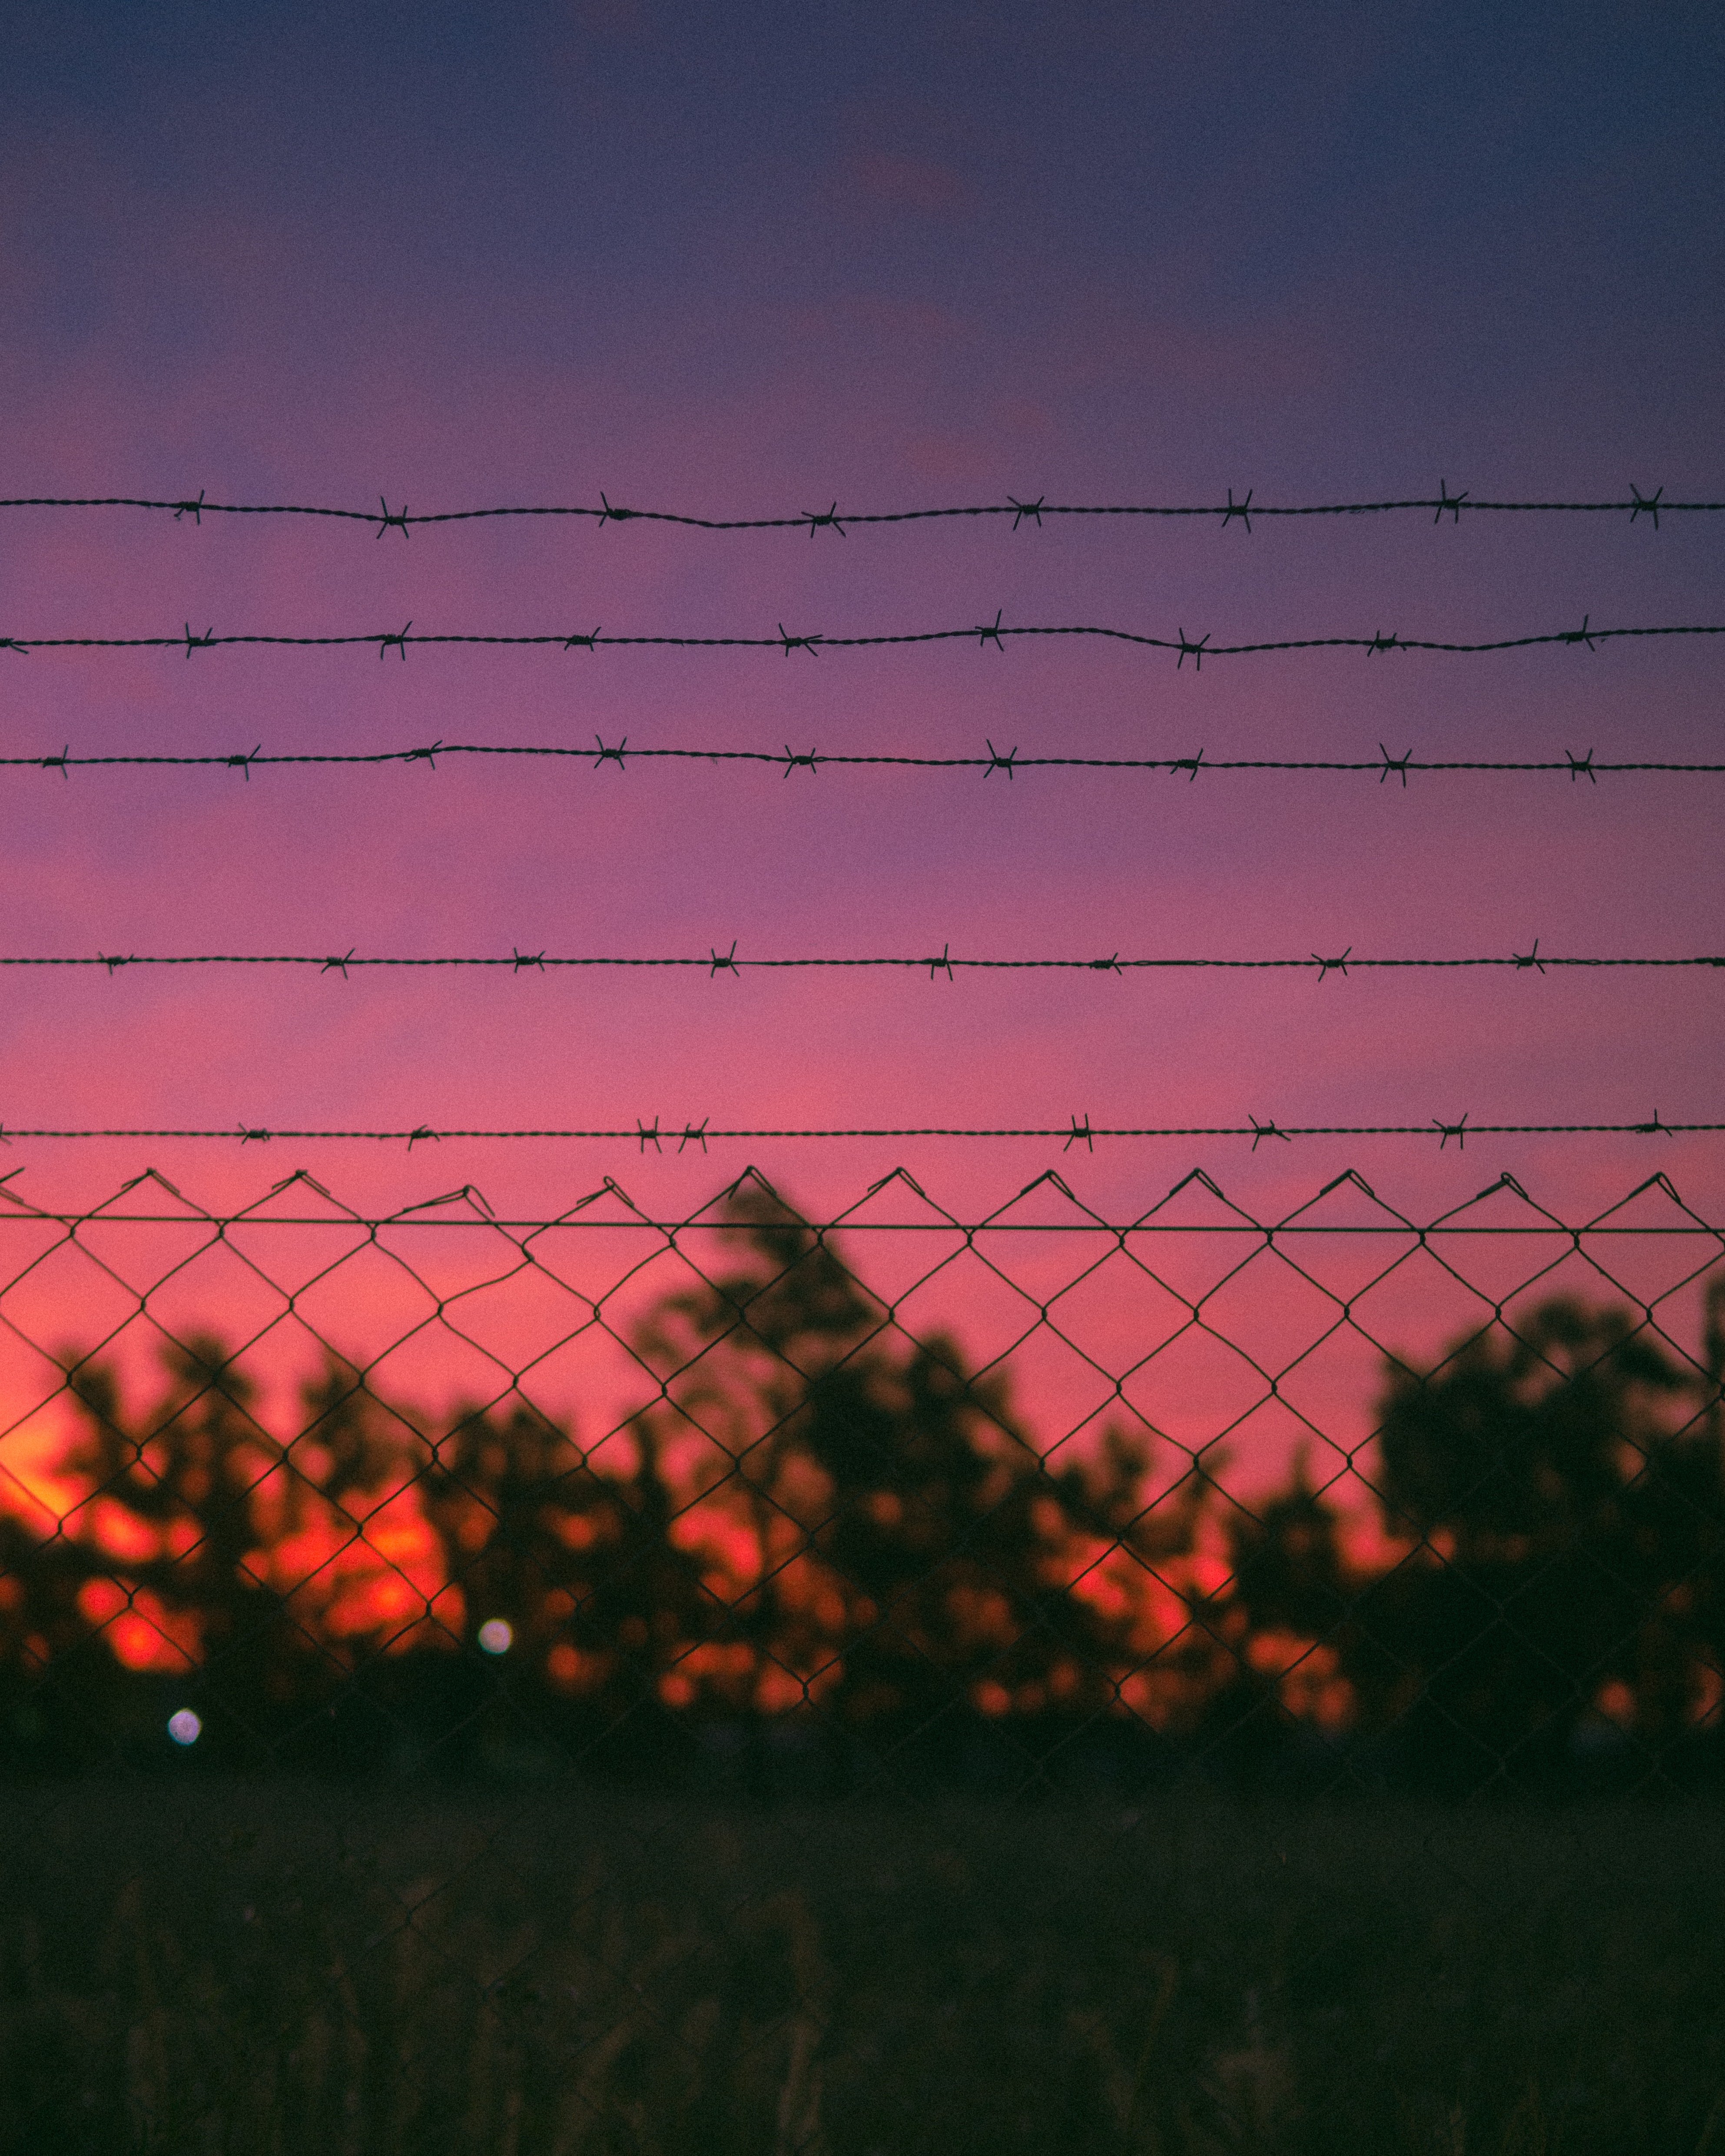 nature, sunset, metal, metallic, wire, barbed wire